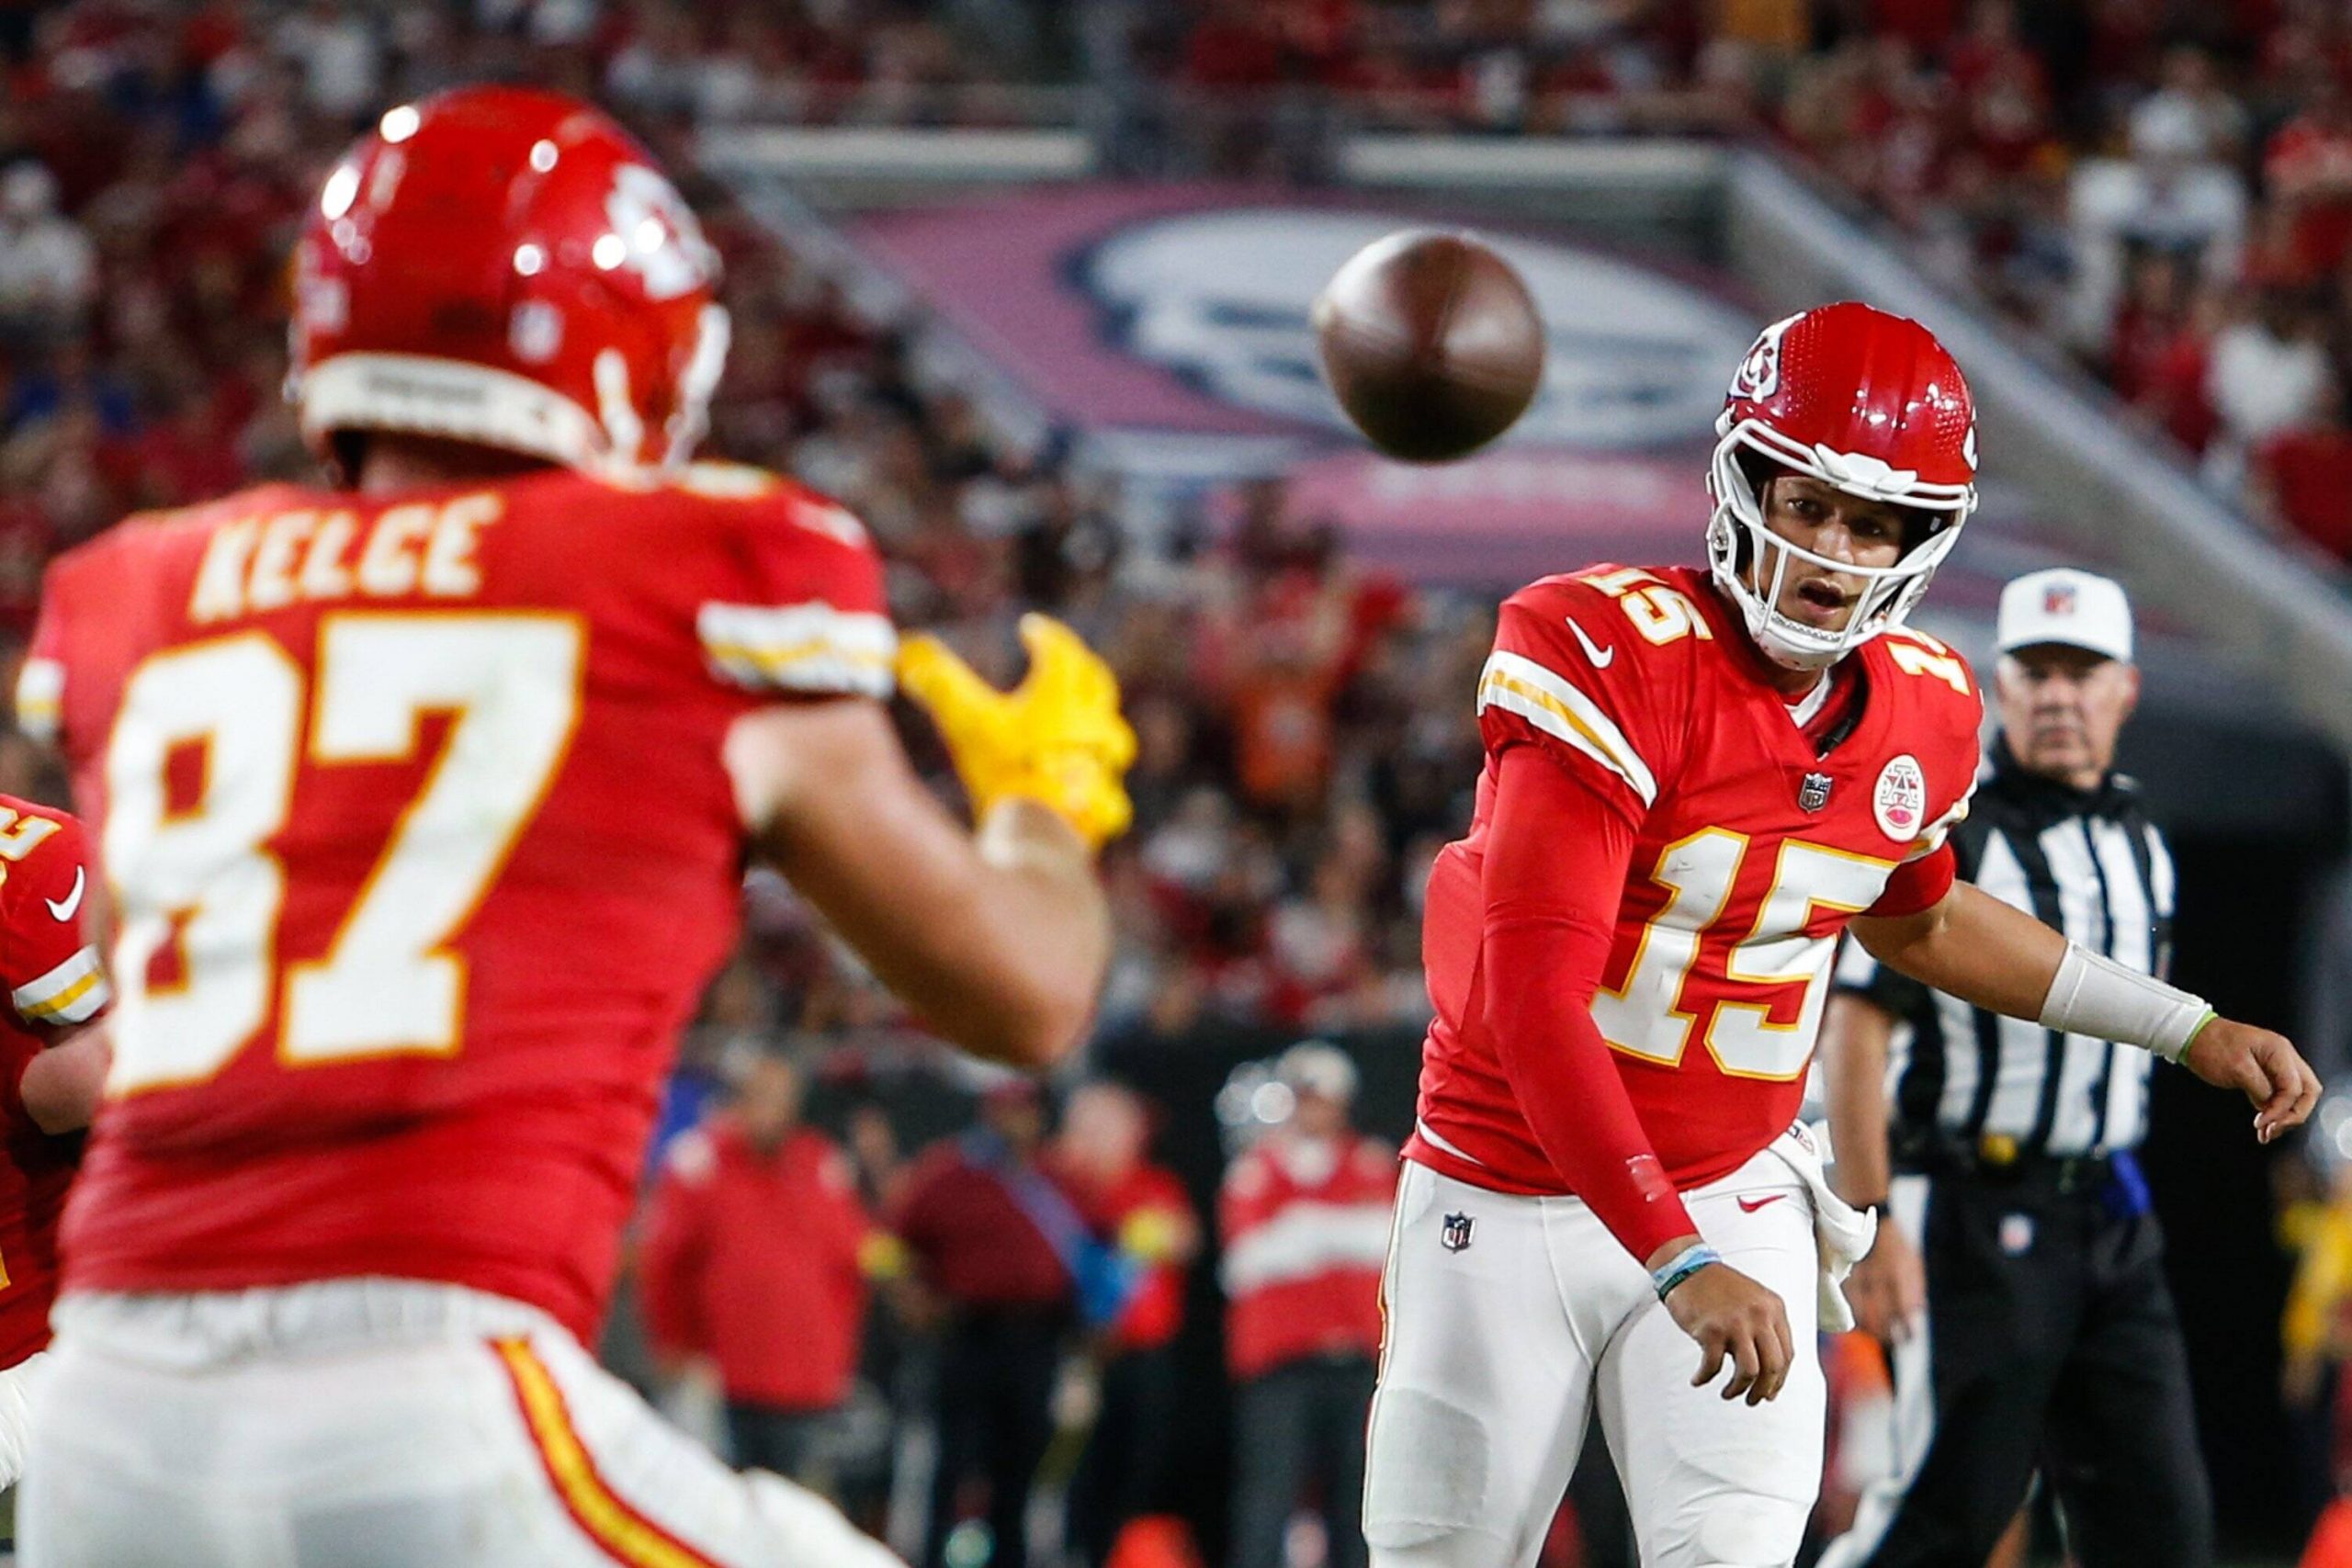 October 2, 2022, Tampa, Florida, USA: Kansas City Chiefs quarterback Patrick Mahomes 15 throws a pass to Kansas City Chiefs tight end Travis Kelce 87, while being pressured by the Tampa Bay Buccaneers during the second quarter at Raymond James Stadium in Tampa on Sunday, Oct. 2, 2022. Tampa USA - ZUMAs70_ 0170323273st Copyright: xJeffereexWoox